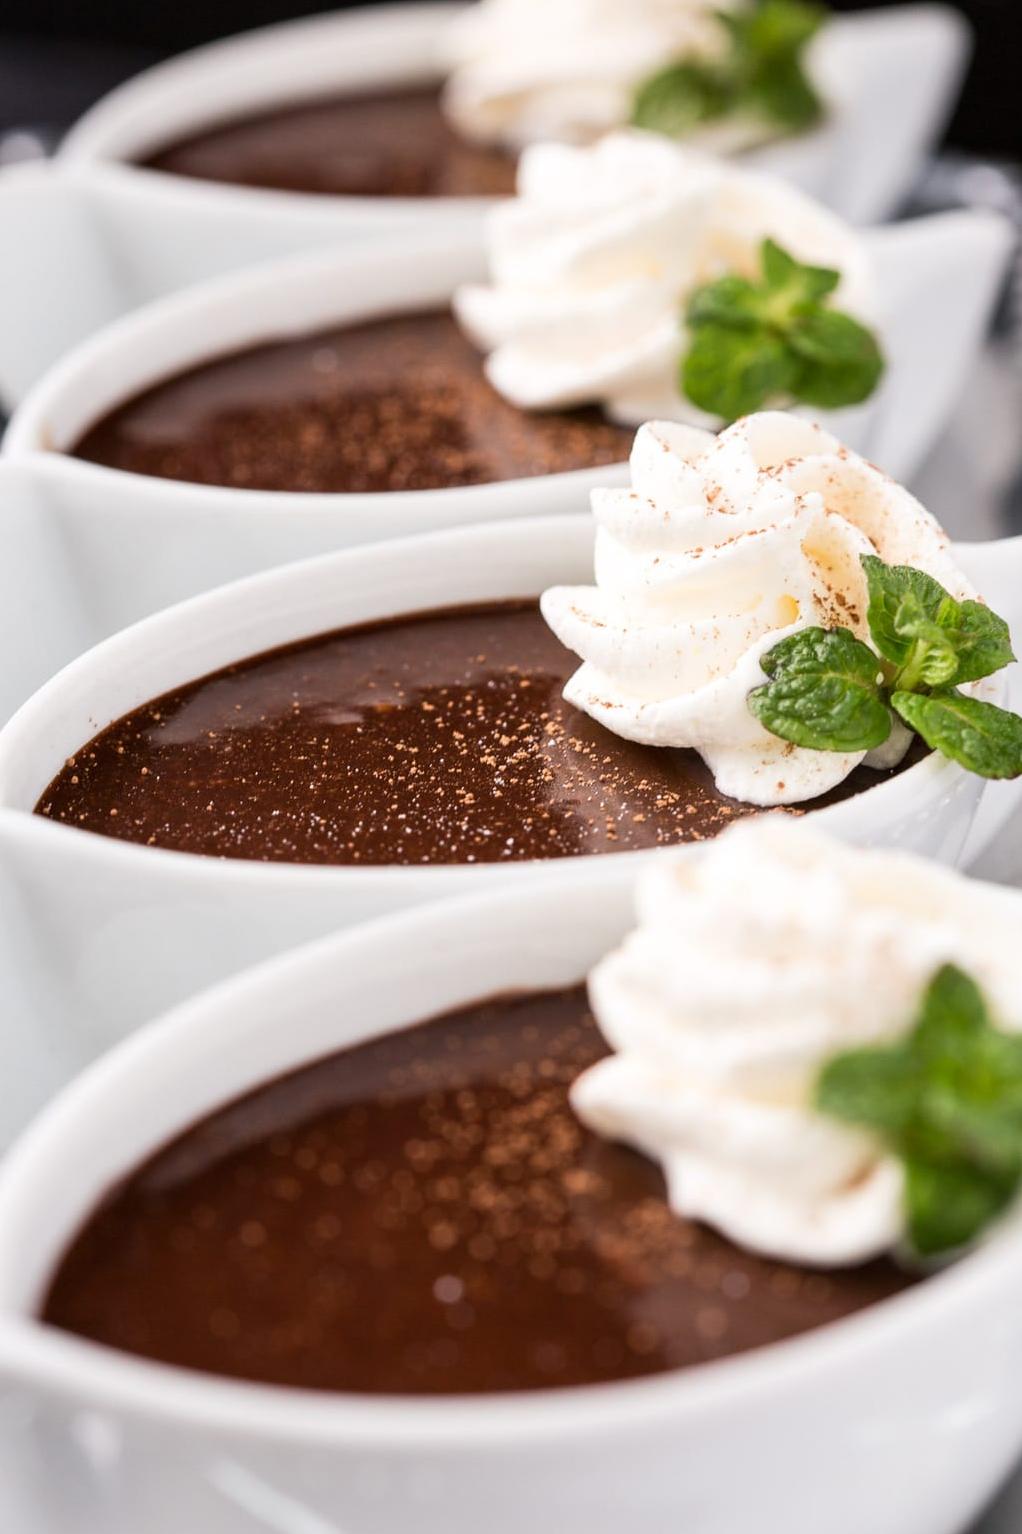  Perfect for dinner parties, these chocolate pots will impress your guests